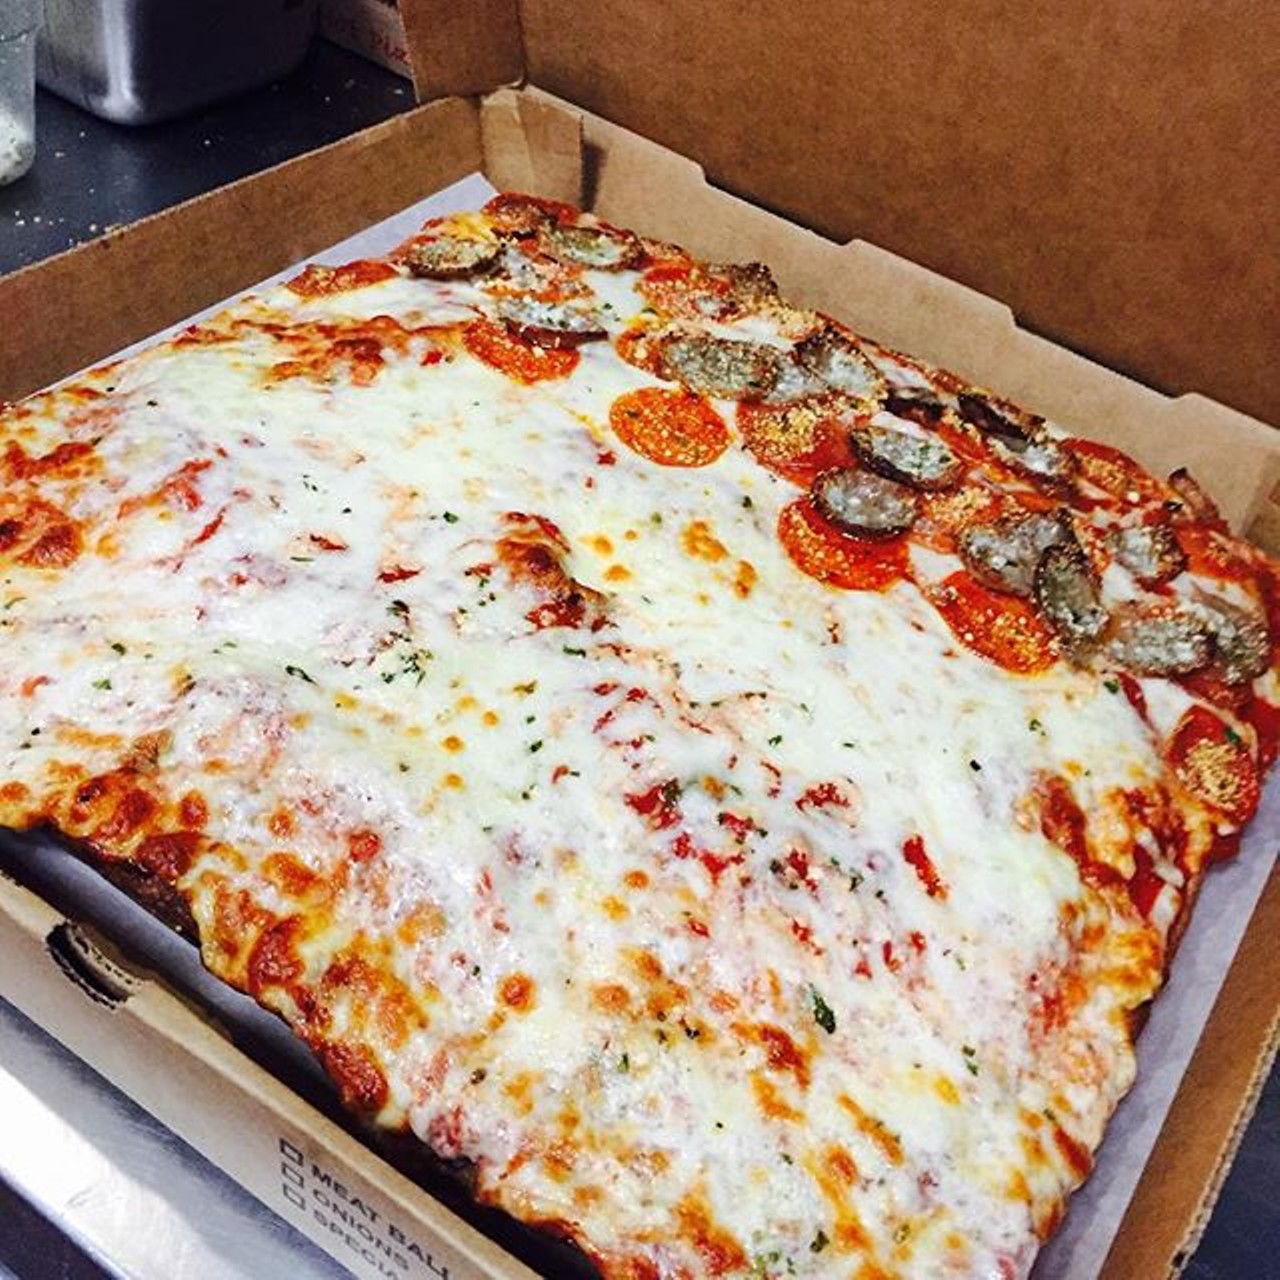 Antonella&#146;s Pizzeria
360 W. Fairbanks Ave., (407) 636-5333
This family-owned restaurant serves Italian food and New York style pizza which can be bought by the slice. It&#146;s a small place so customers can get food catered or order take out.
Photo via antonellaspizzeria/Instagram